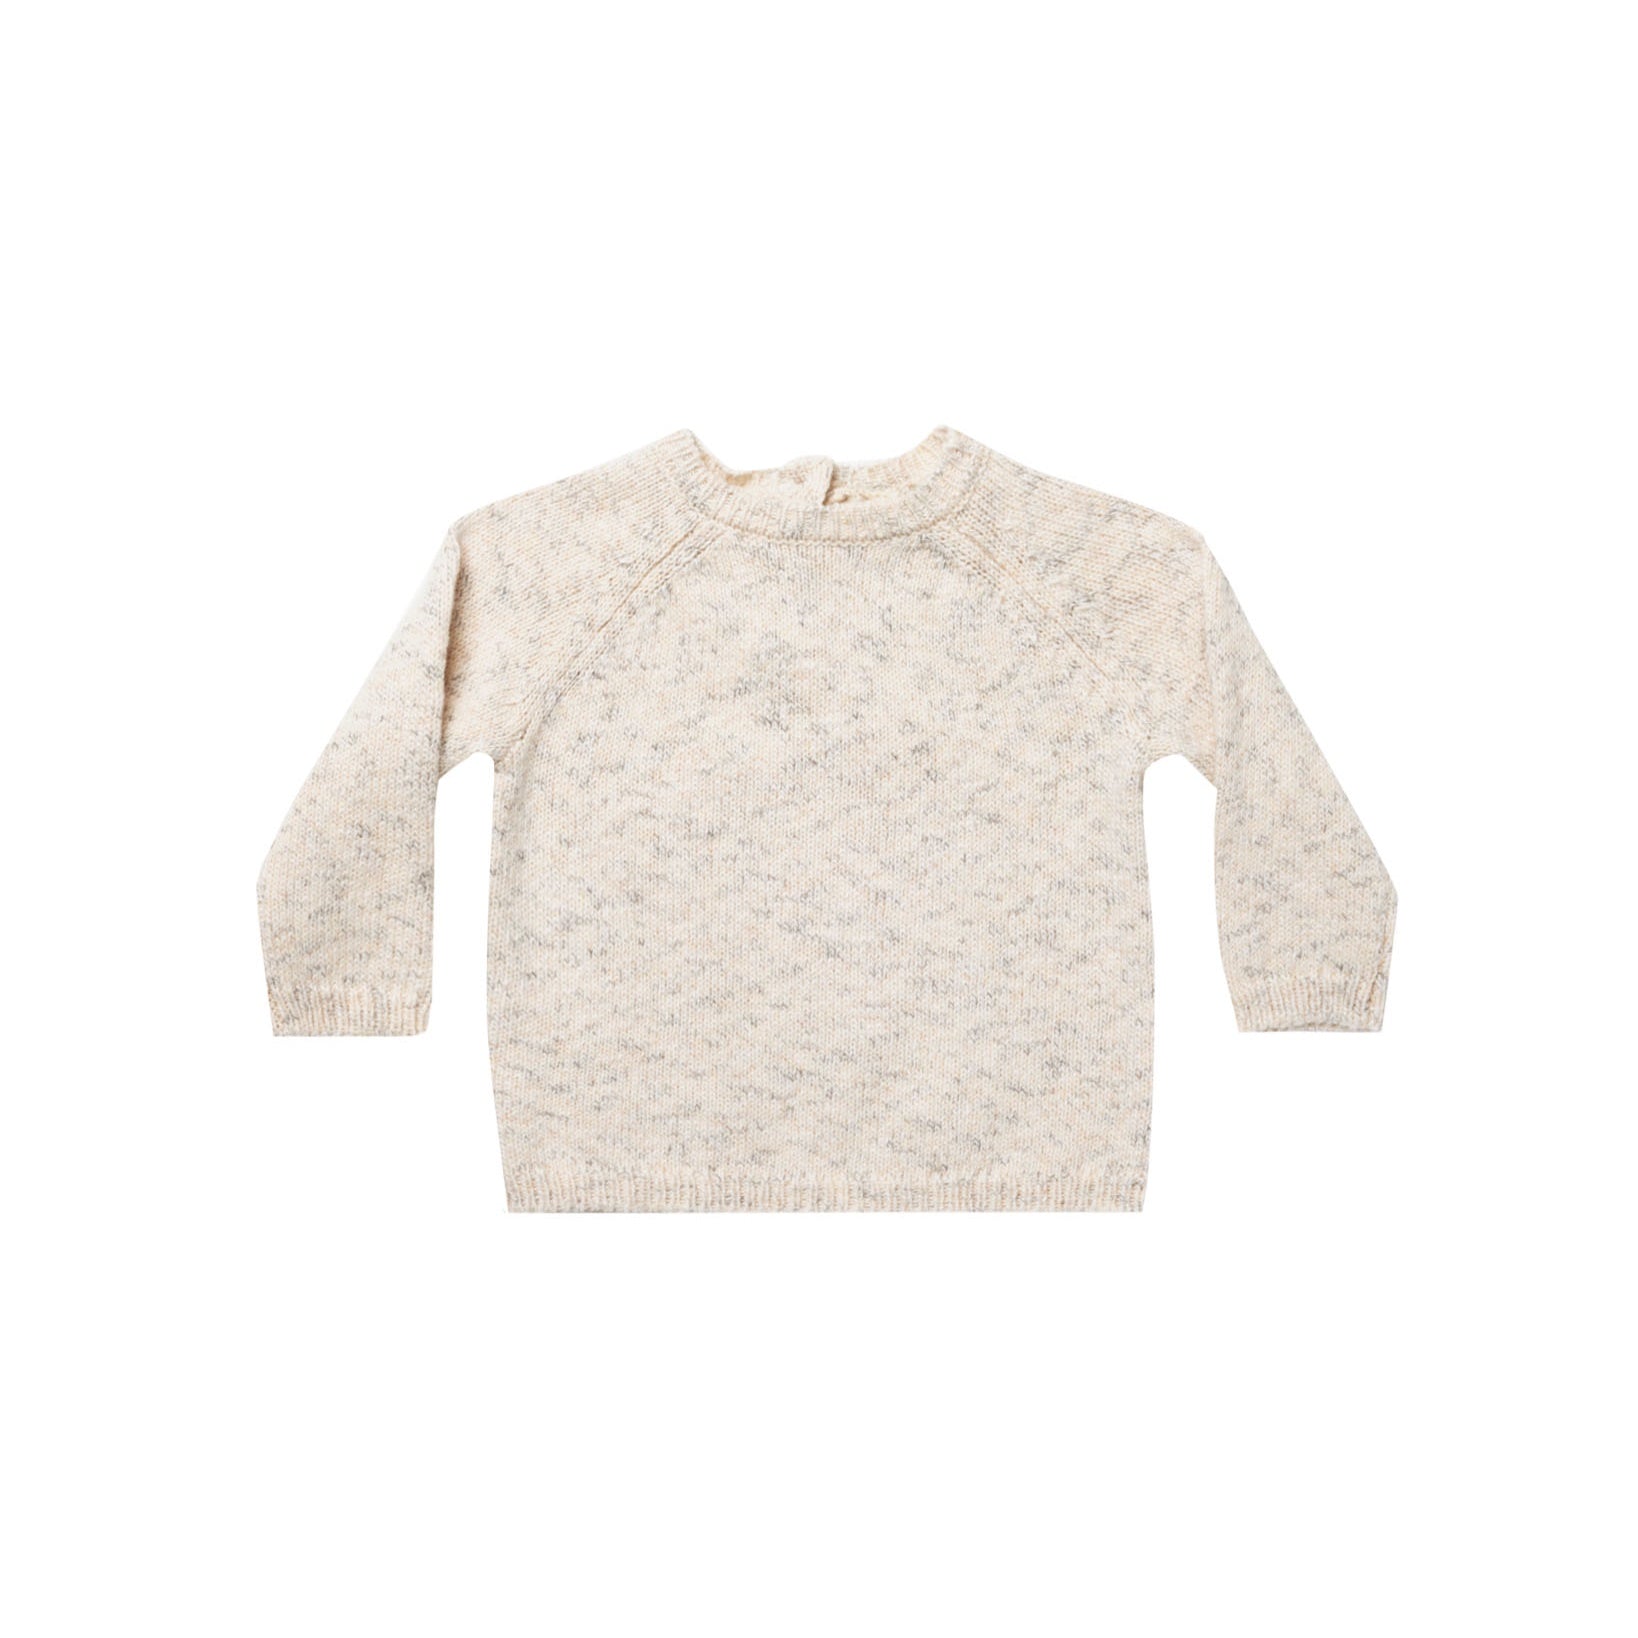 Knit Sweater - Natural